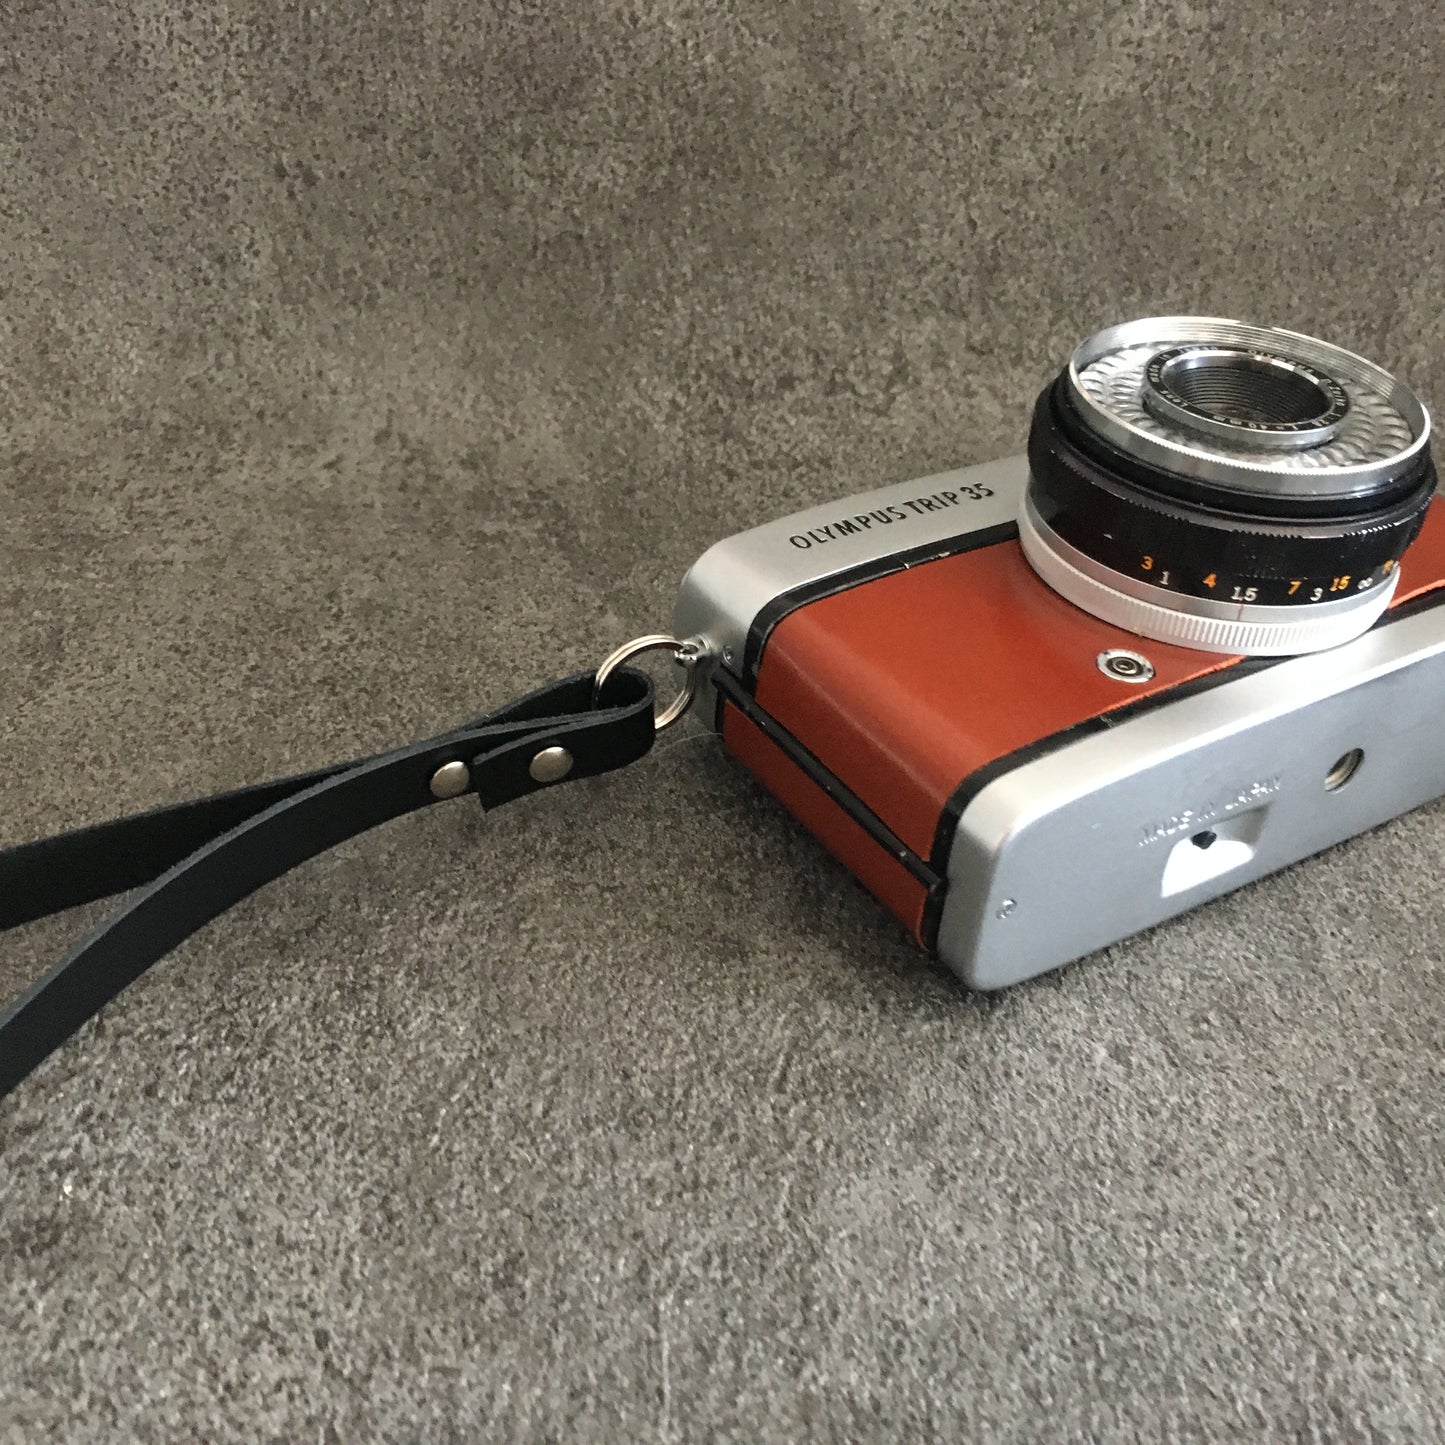 Olympus TRIP35  with russet brown leather